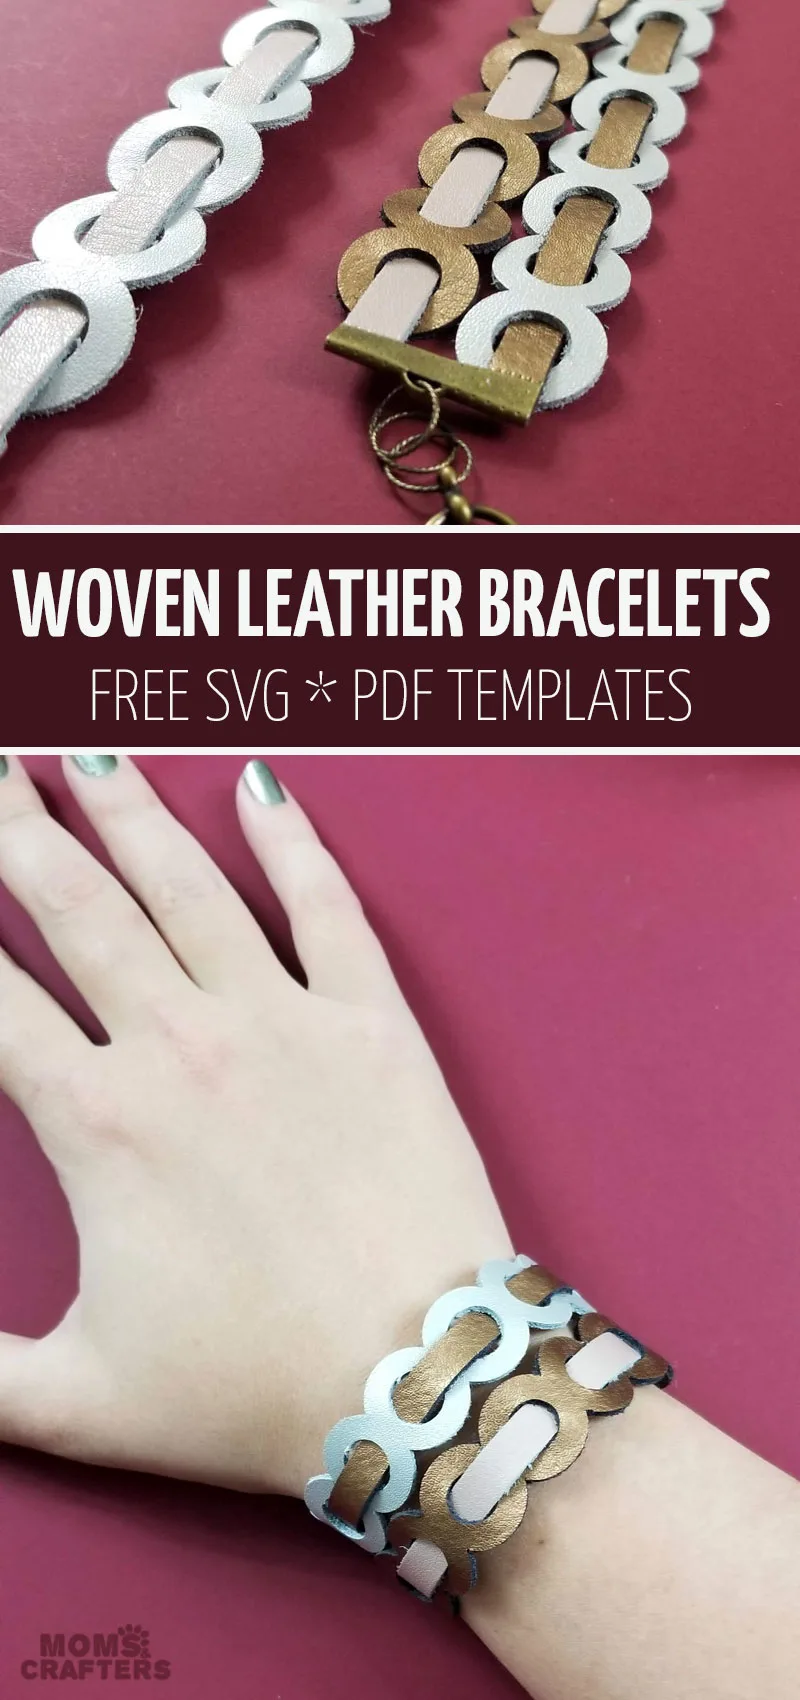 Click ot learn how to make woven leather bracelets using your Cricut Explore Air 2 or Maker. This fun leather jewerly making craft and projects includes a free SVG. It's one of my favorite cricut jewelry ideas!